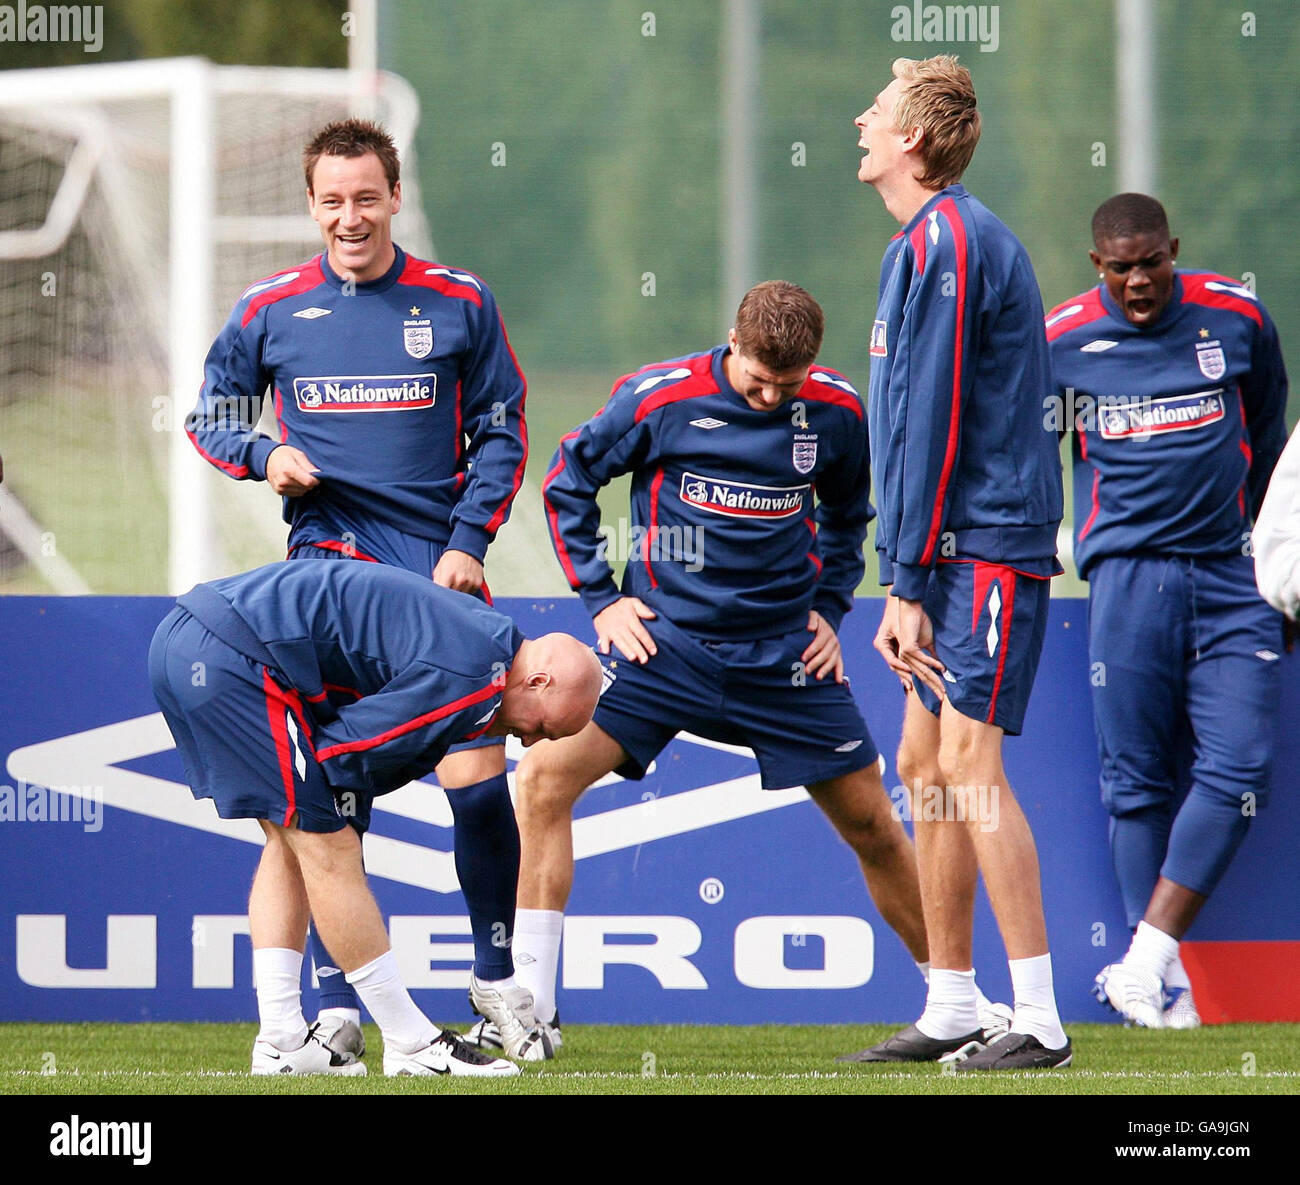 England's John Terry, Andrew Johnson, Steven Gerrard, Peter Crouch and Micha Richards during a training session at London Colney, Hertfordshire. Stock Photo